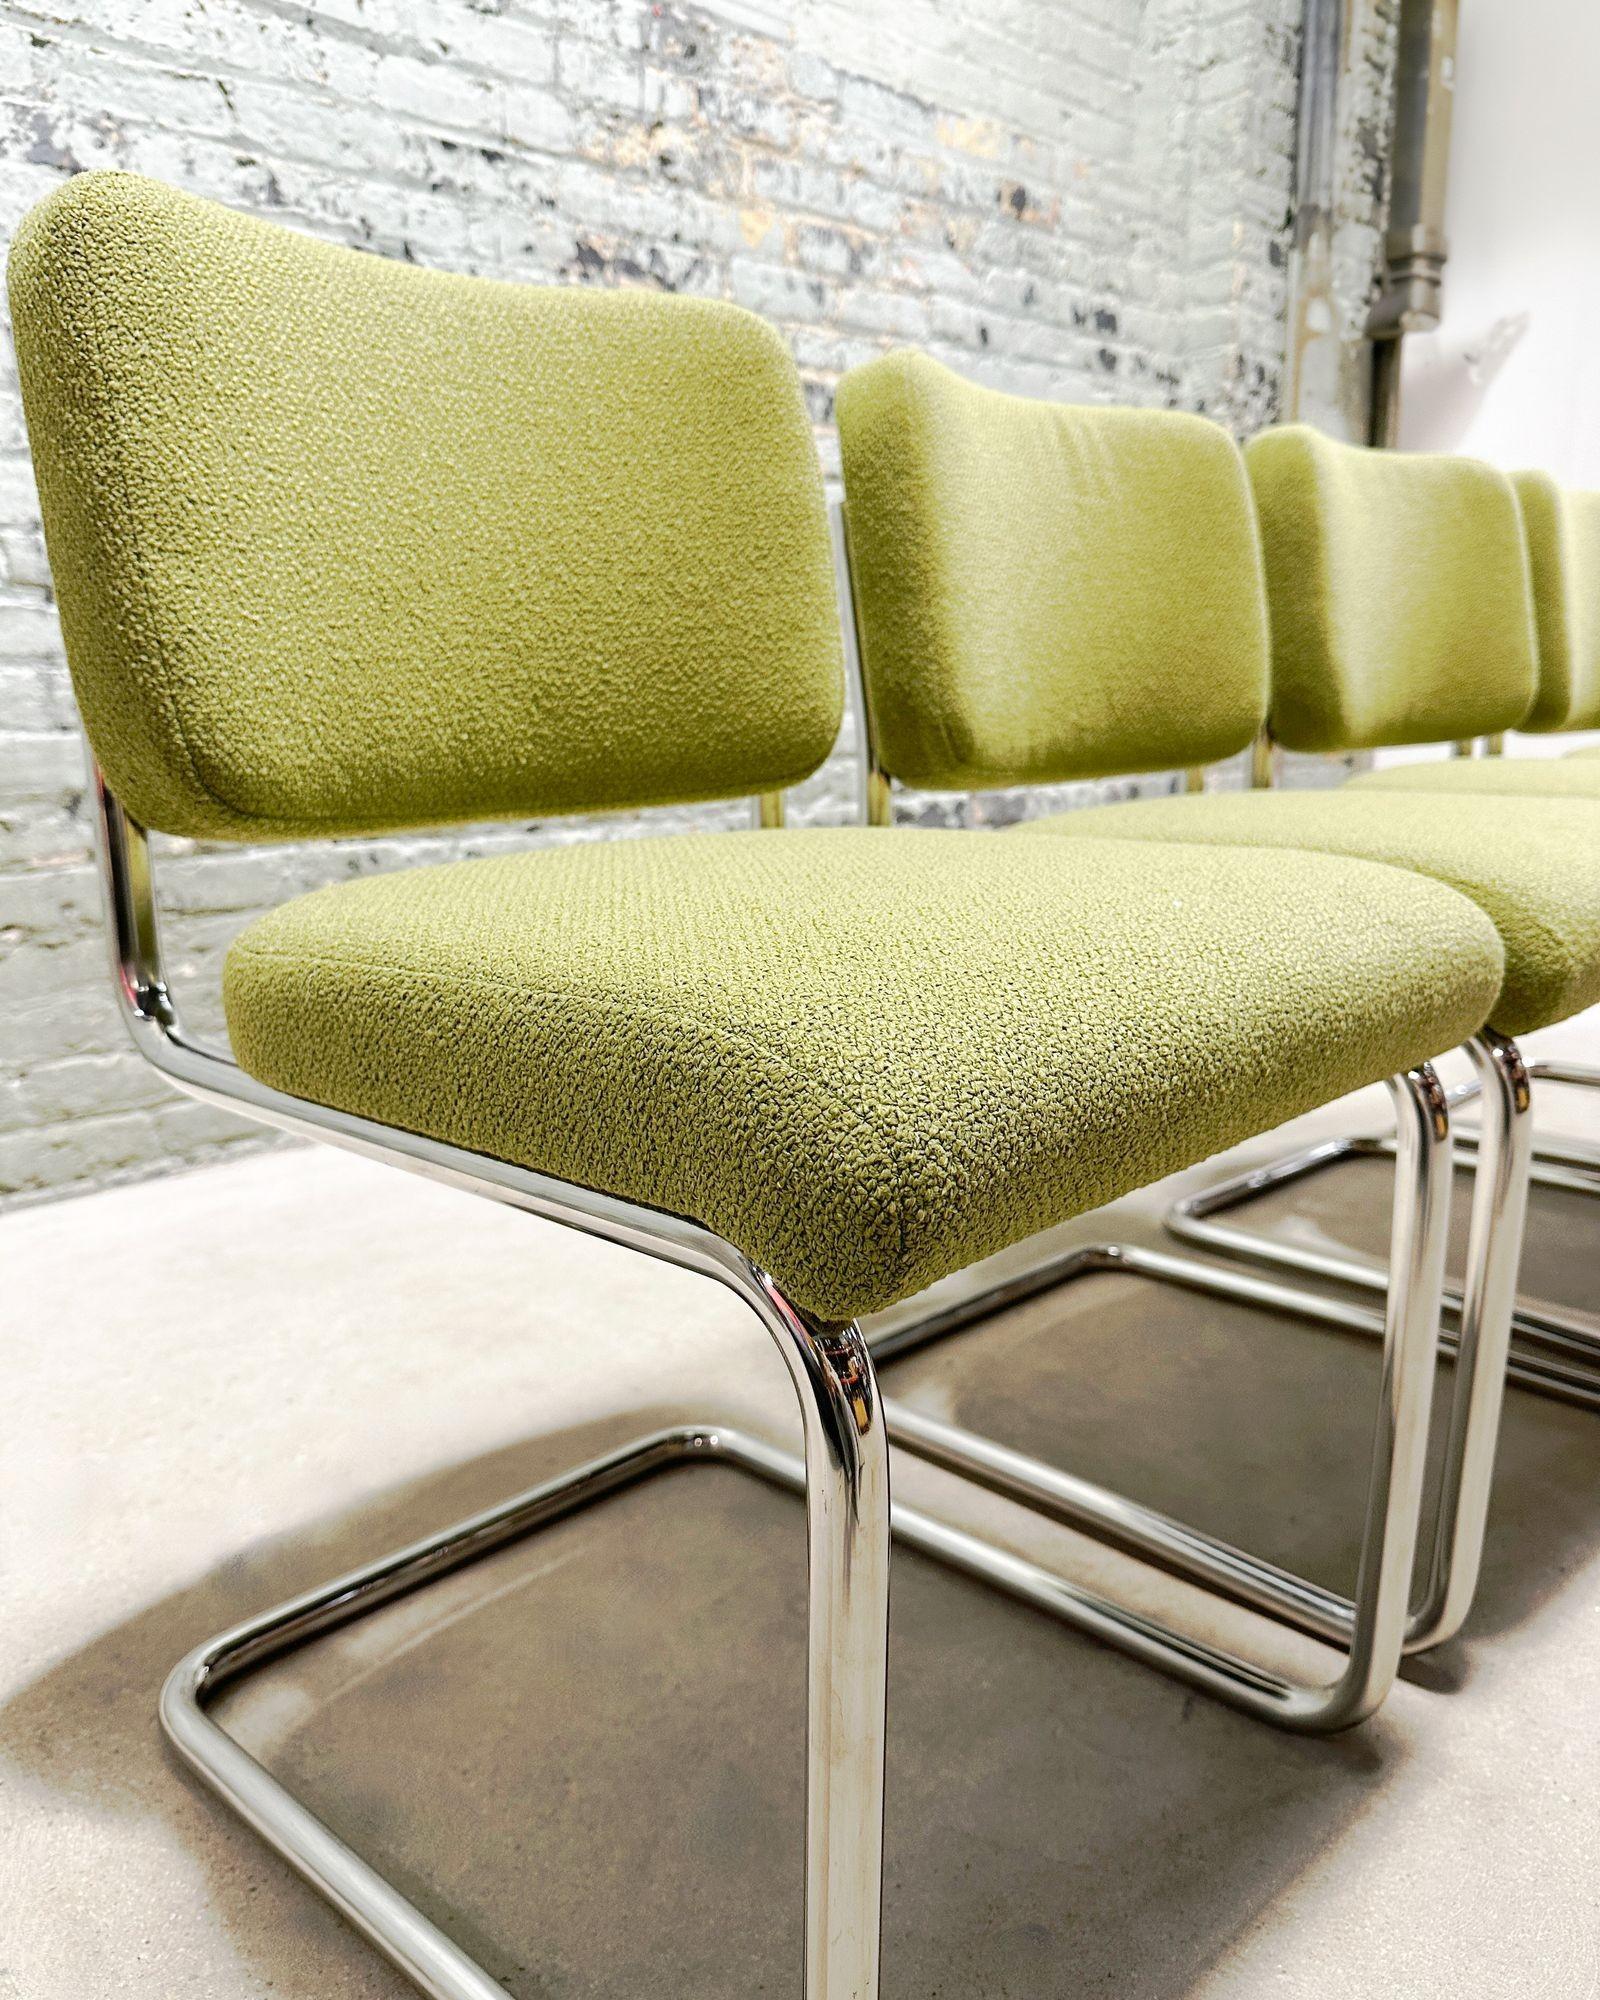 Marcel Breuer for Knoll Cesca Side/Dining Chairs, 1980. These 6 Newly reupholstered green boucle.
We have a large quantity of these chairs. You are welcome to send your own COM and we will reupholster at no additional charge
Chairs Measure 32